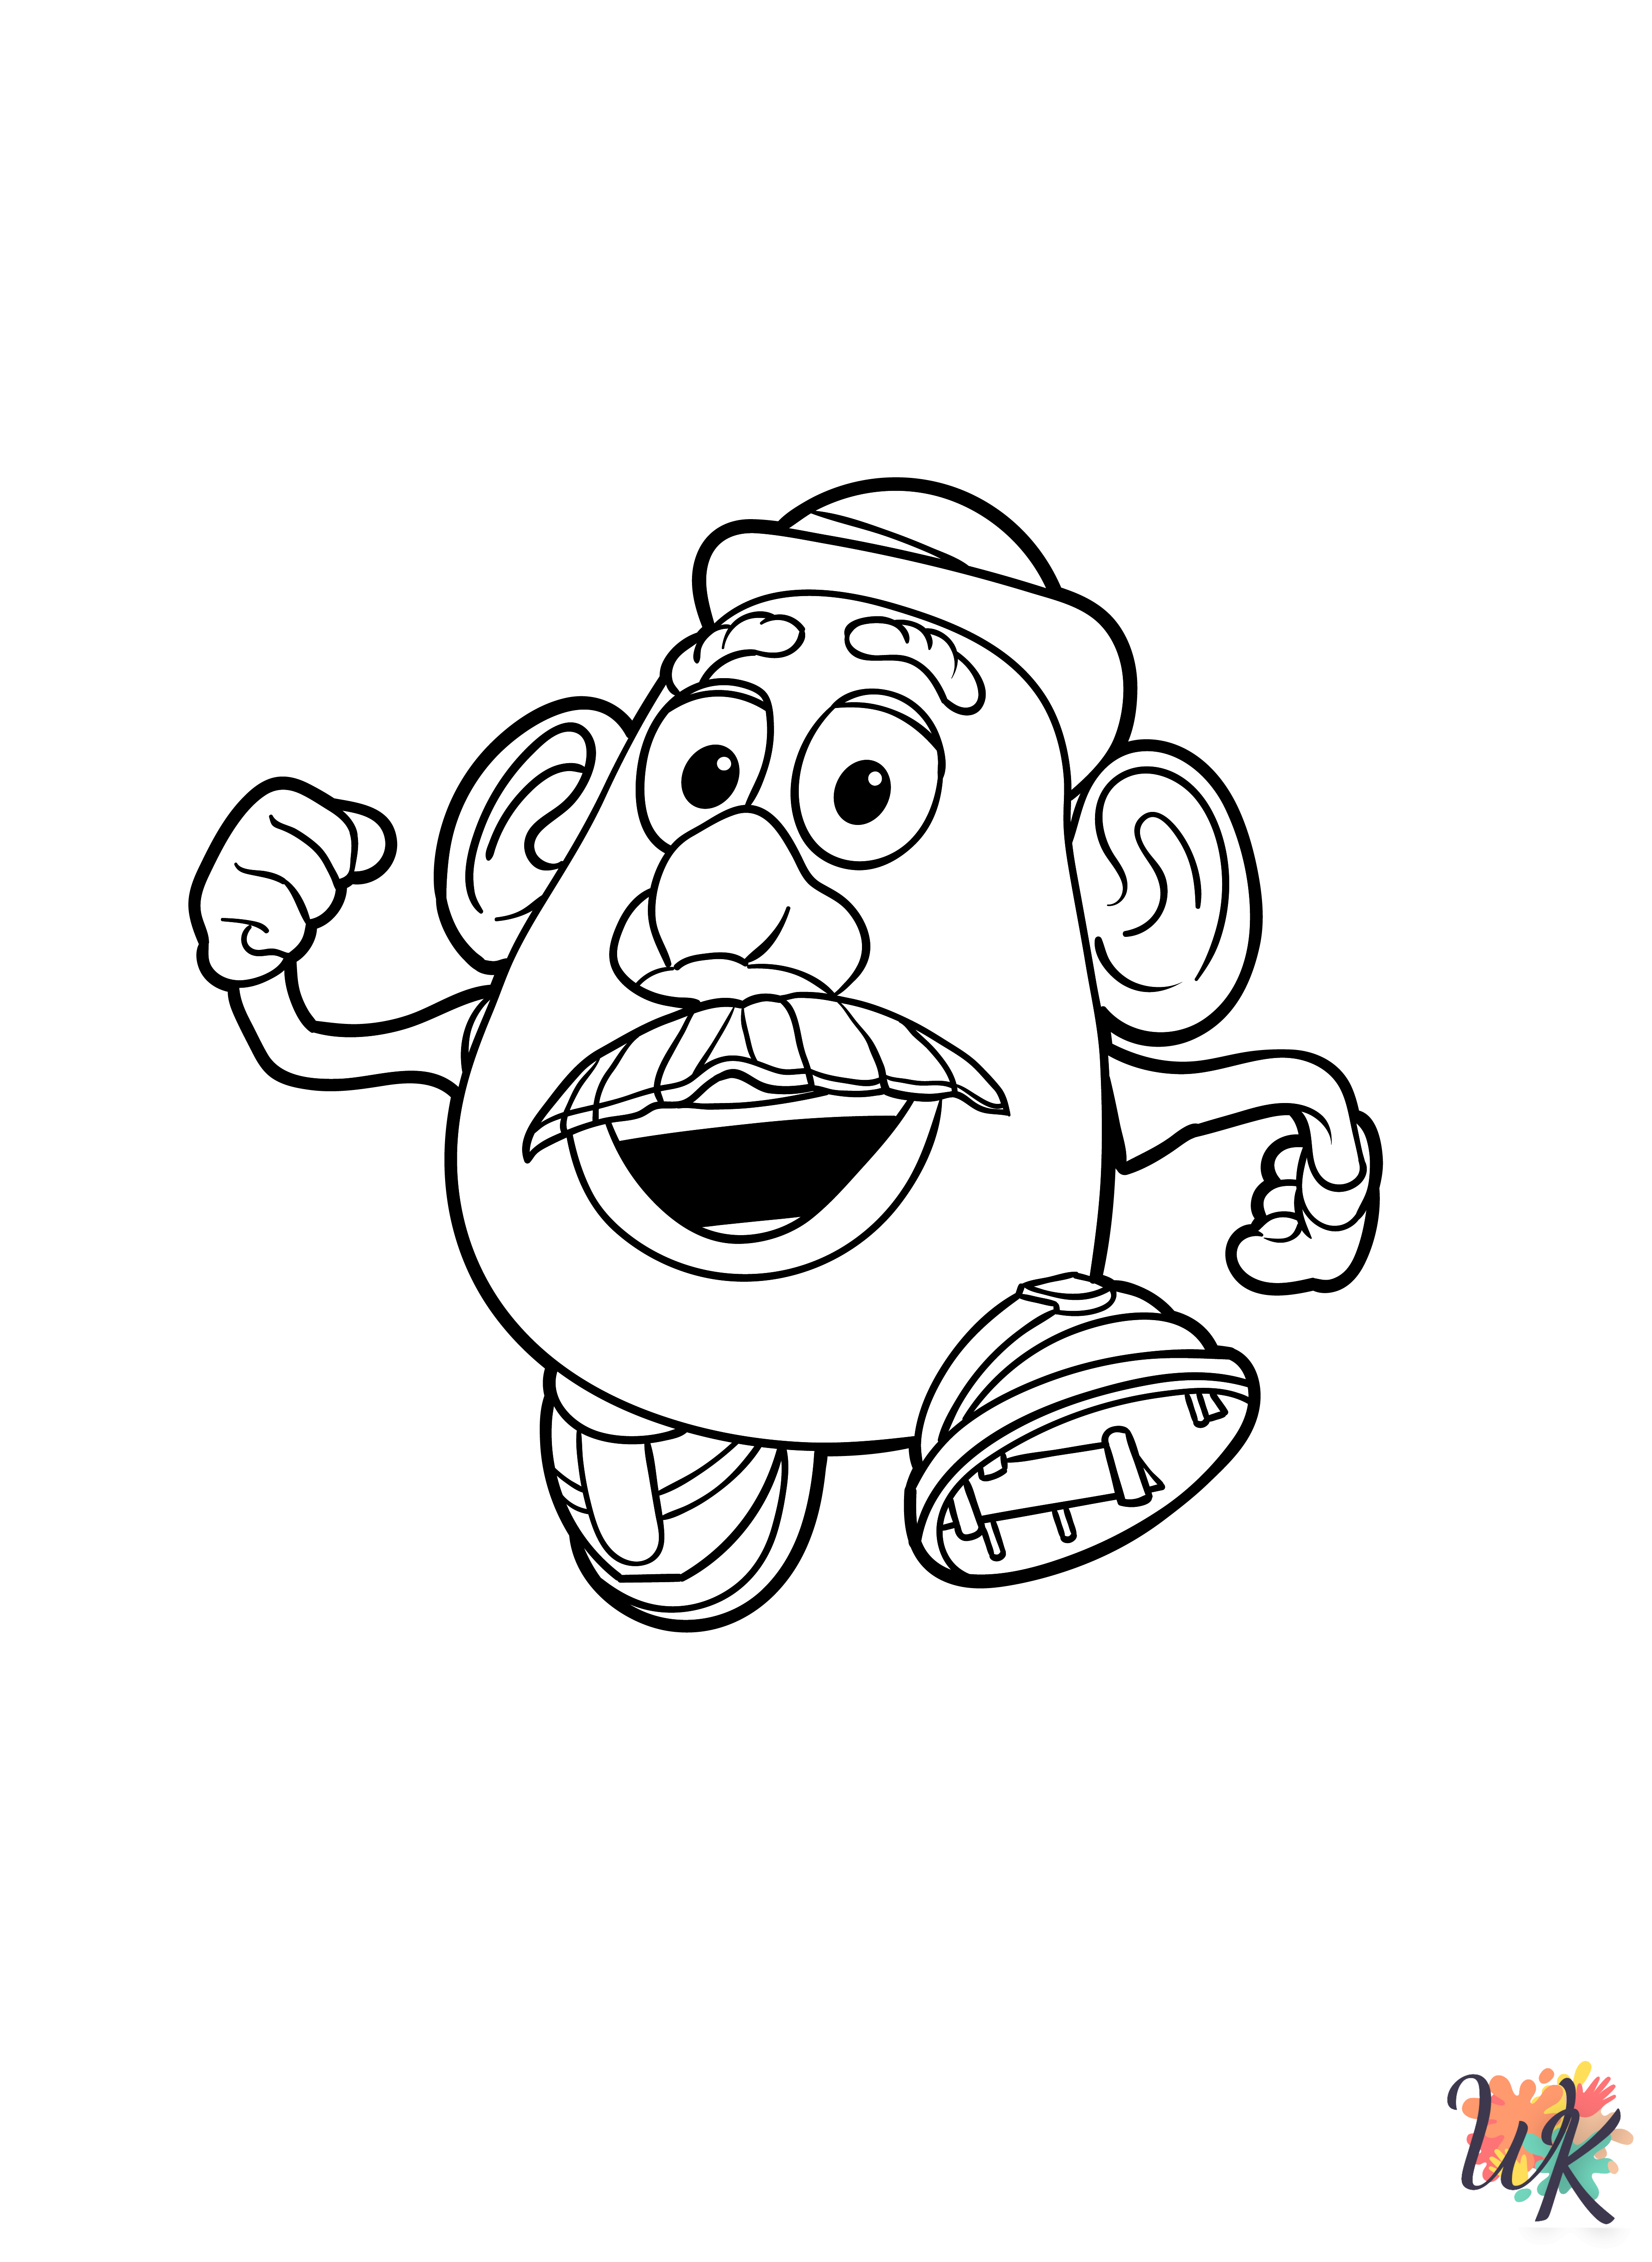 Toy Story free coloring pages